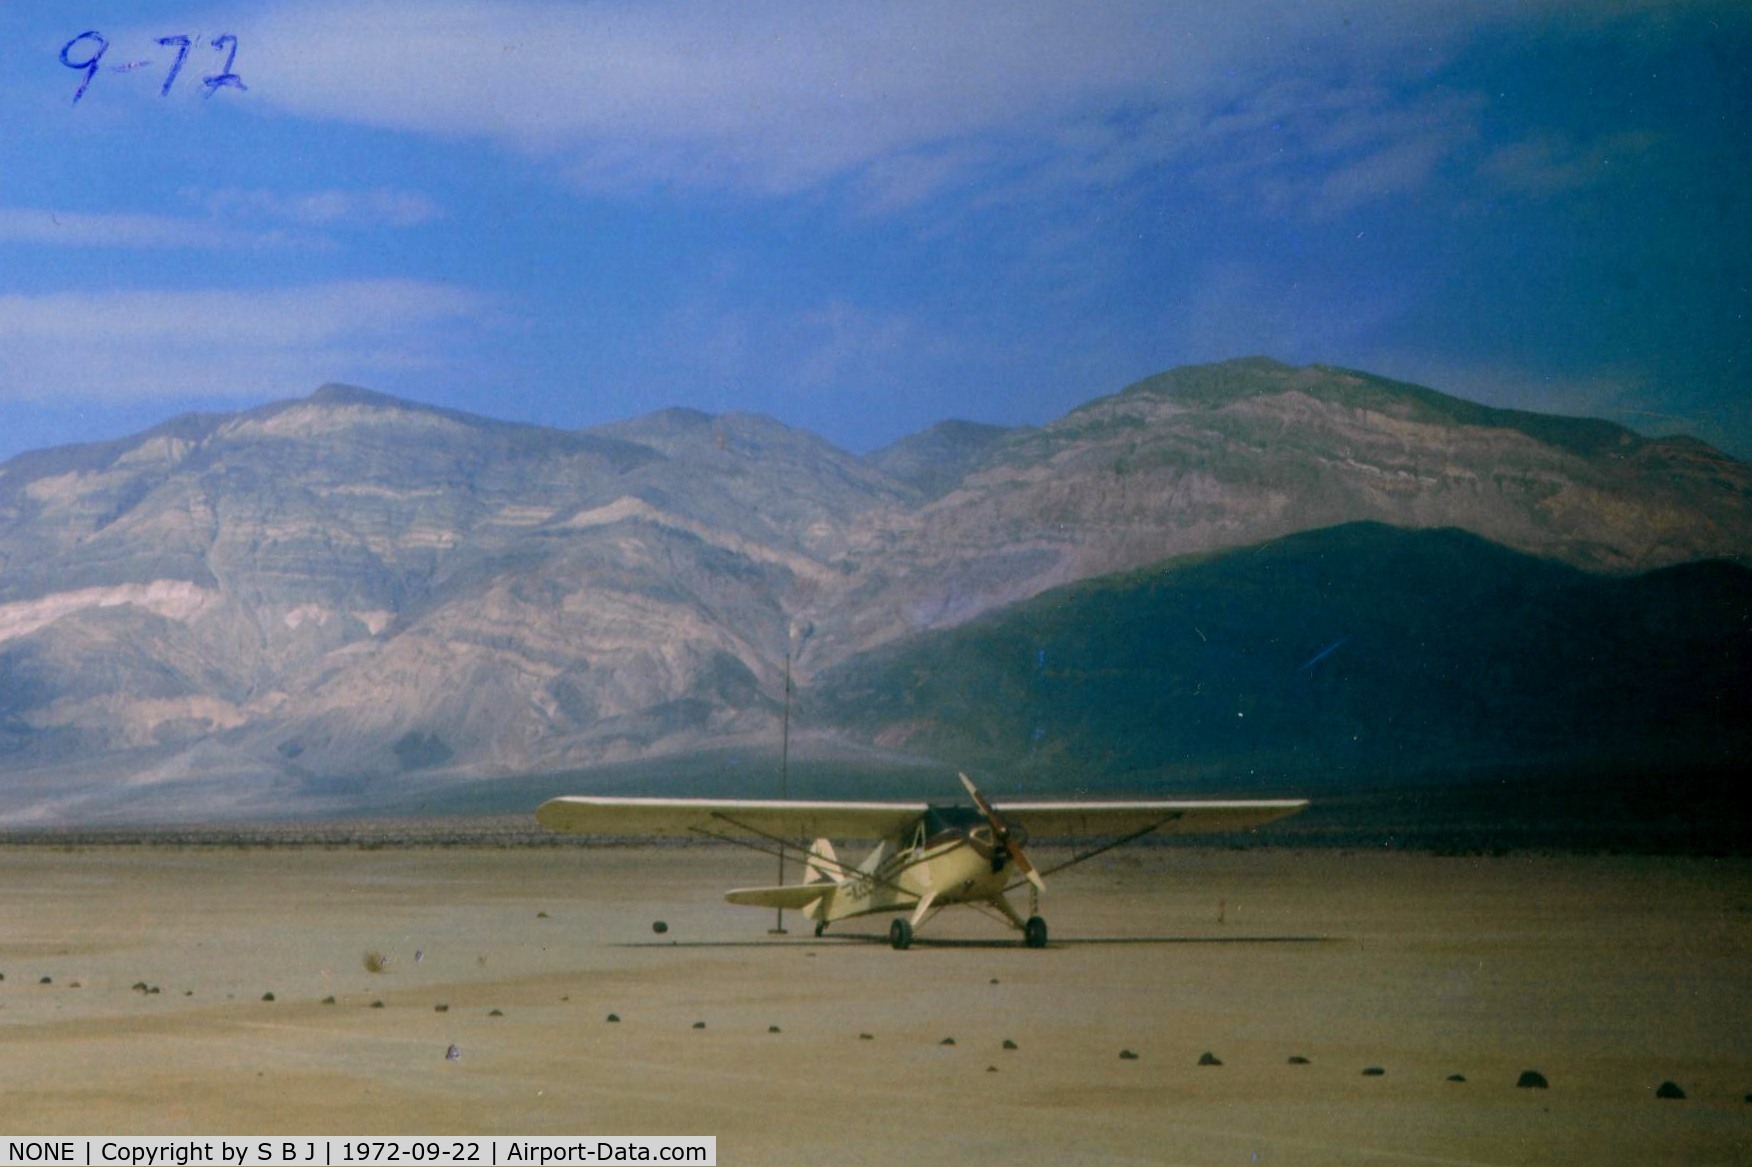 NONE Airport - Panamint dry lake was once well used for all kinds of recreation.The pole behind 246 was a nice windsock.That and other things (stakes & rocks)indicated large airplane use at one time.After years of inquiry,I failed to learn anything more.